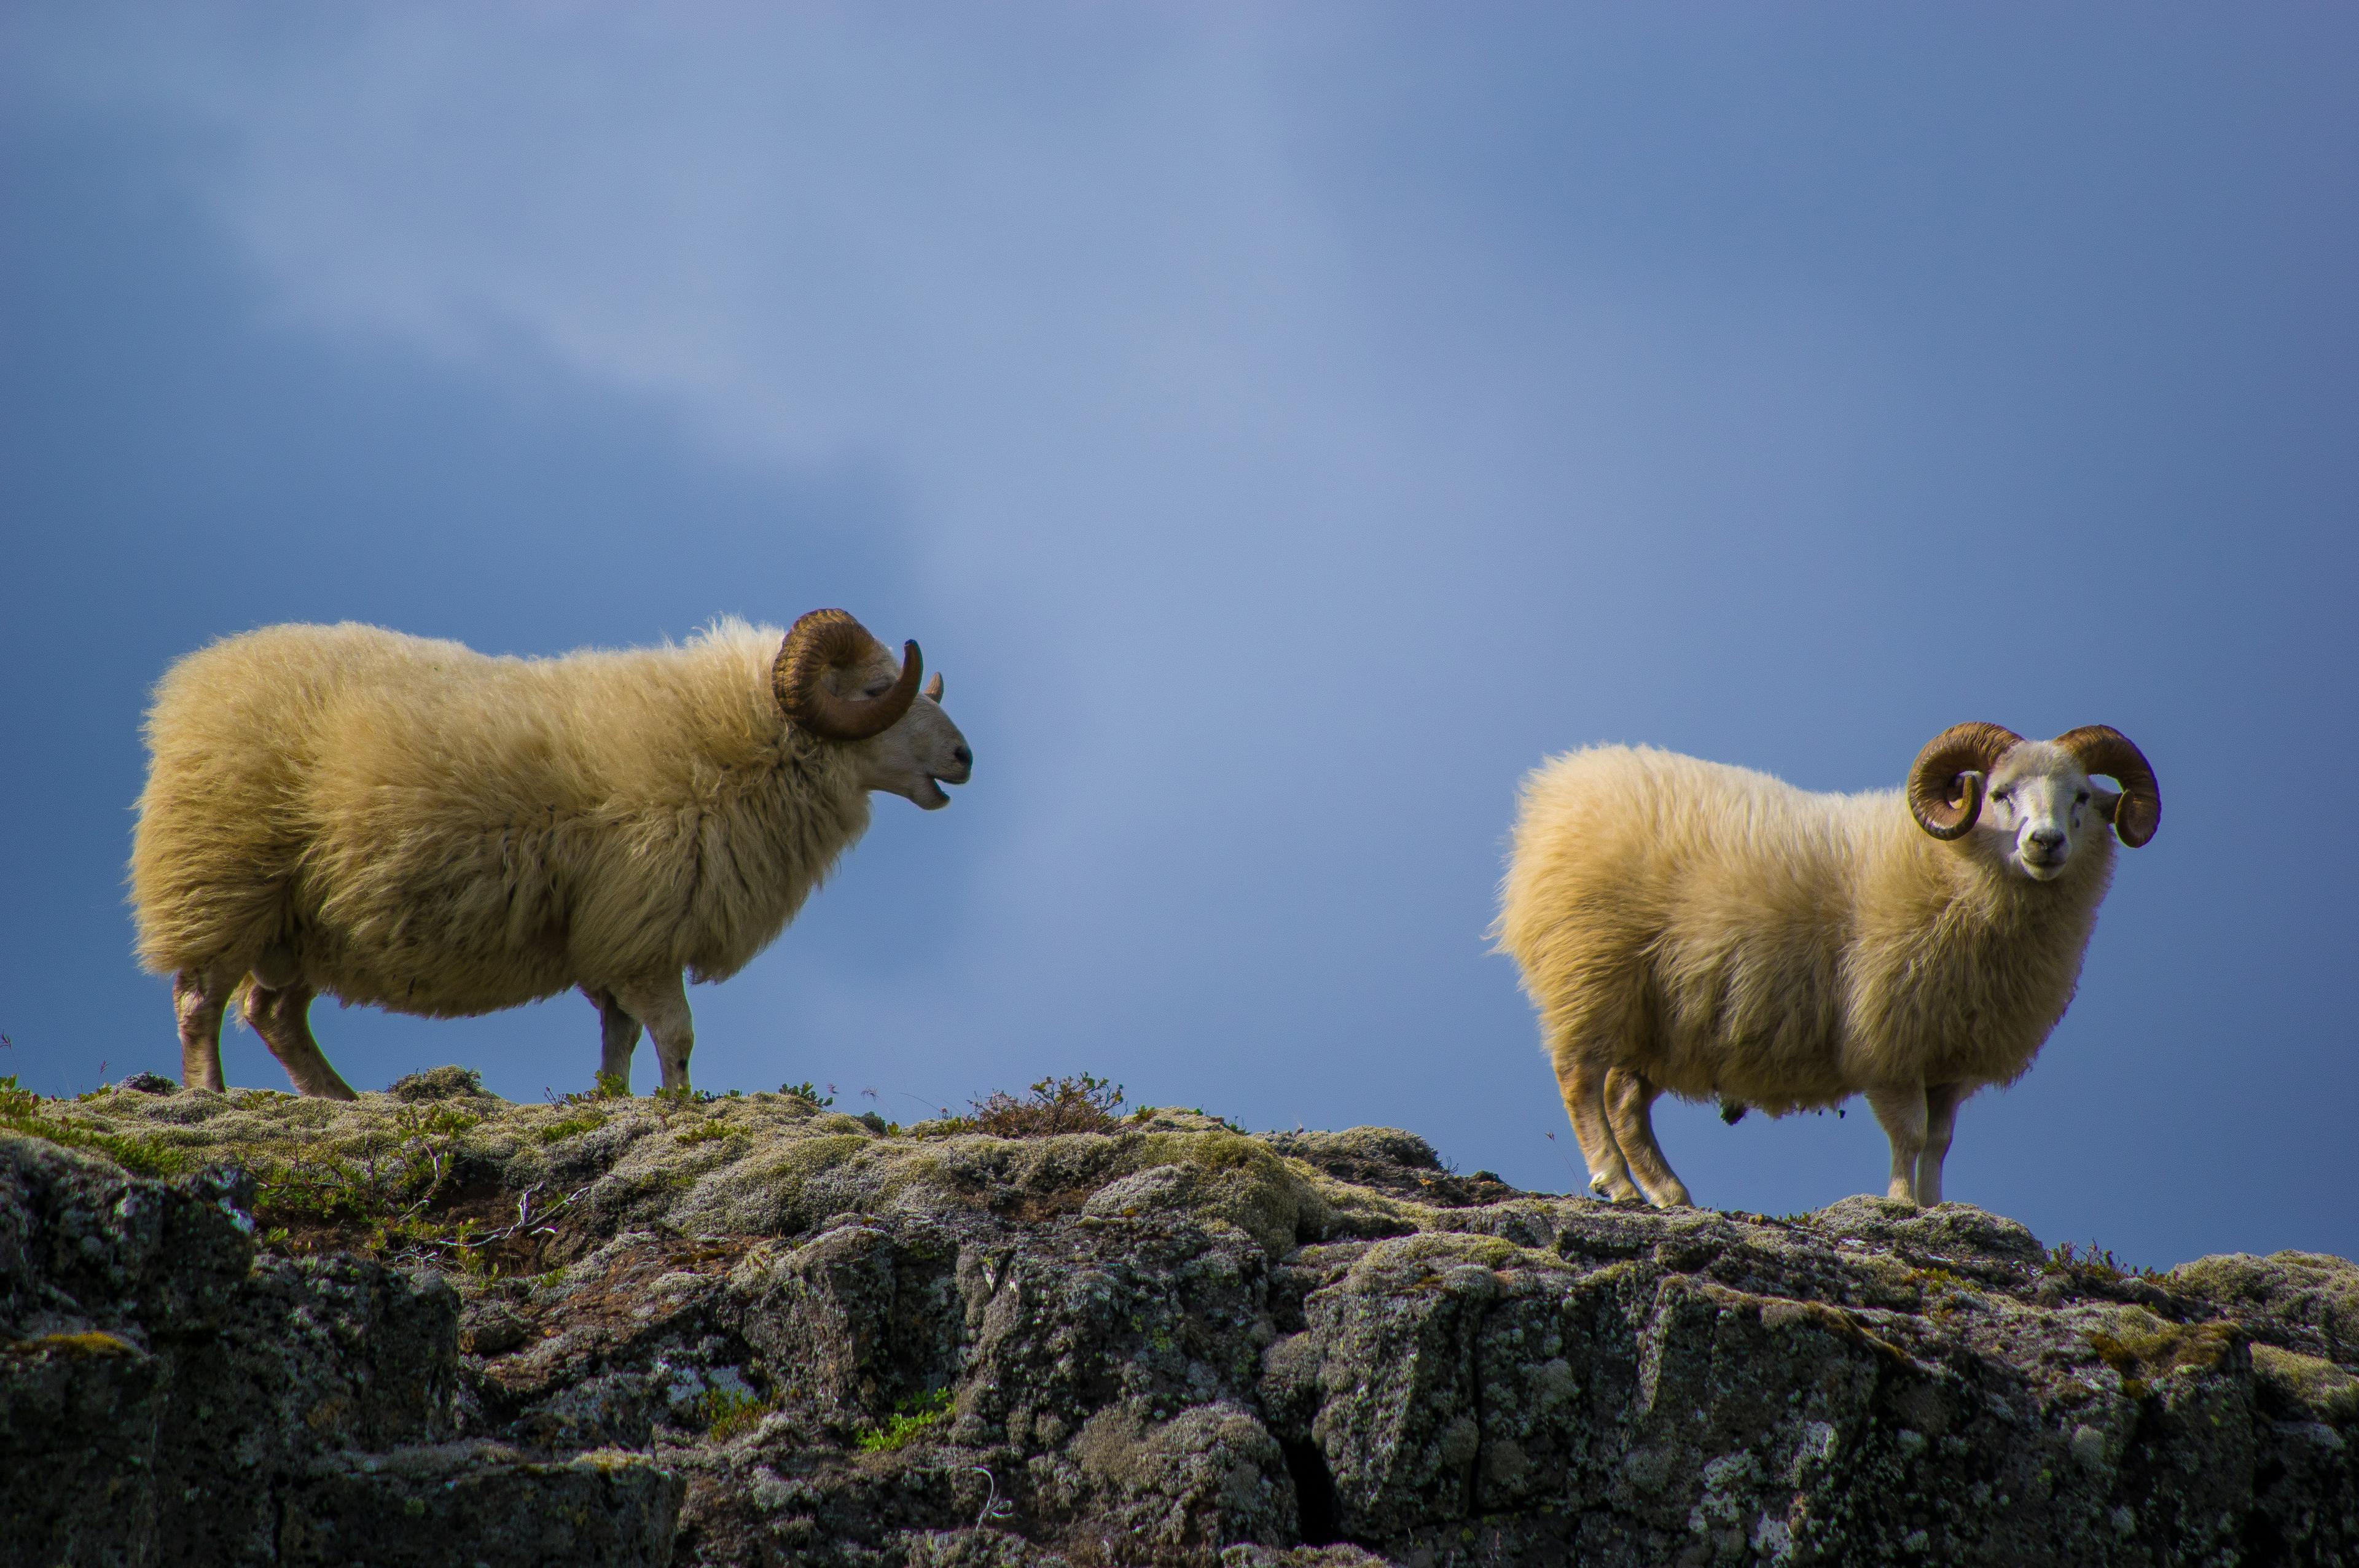 Two fluffy, horned sheep standing atop a rocky outcrop, against a backdrop of a moody sky, a scene that captures the rustic and pastoral charm commonly found in the Icelandic countryside.